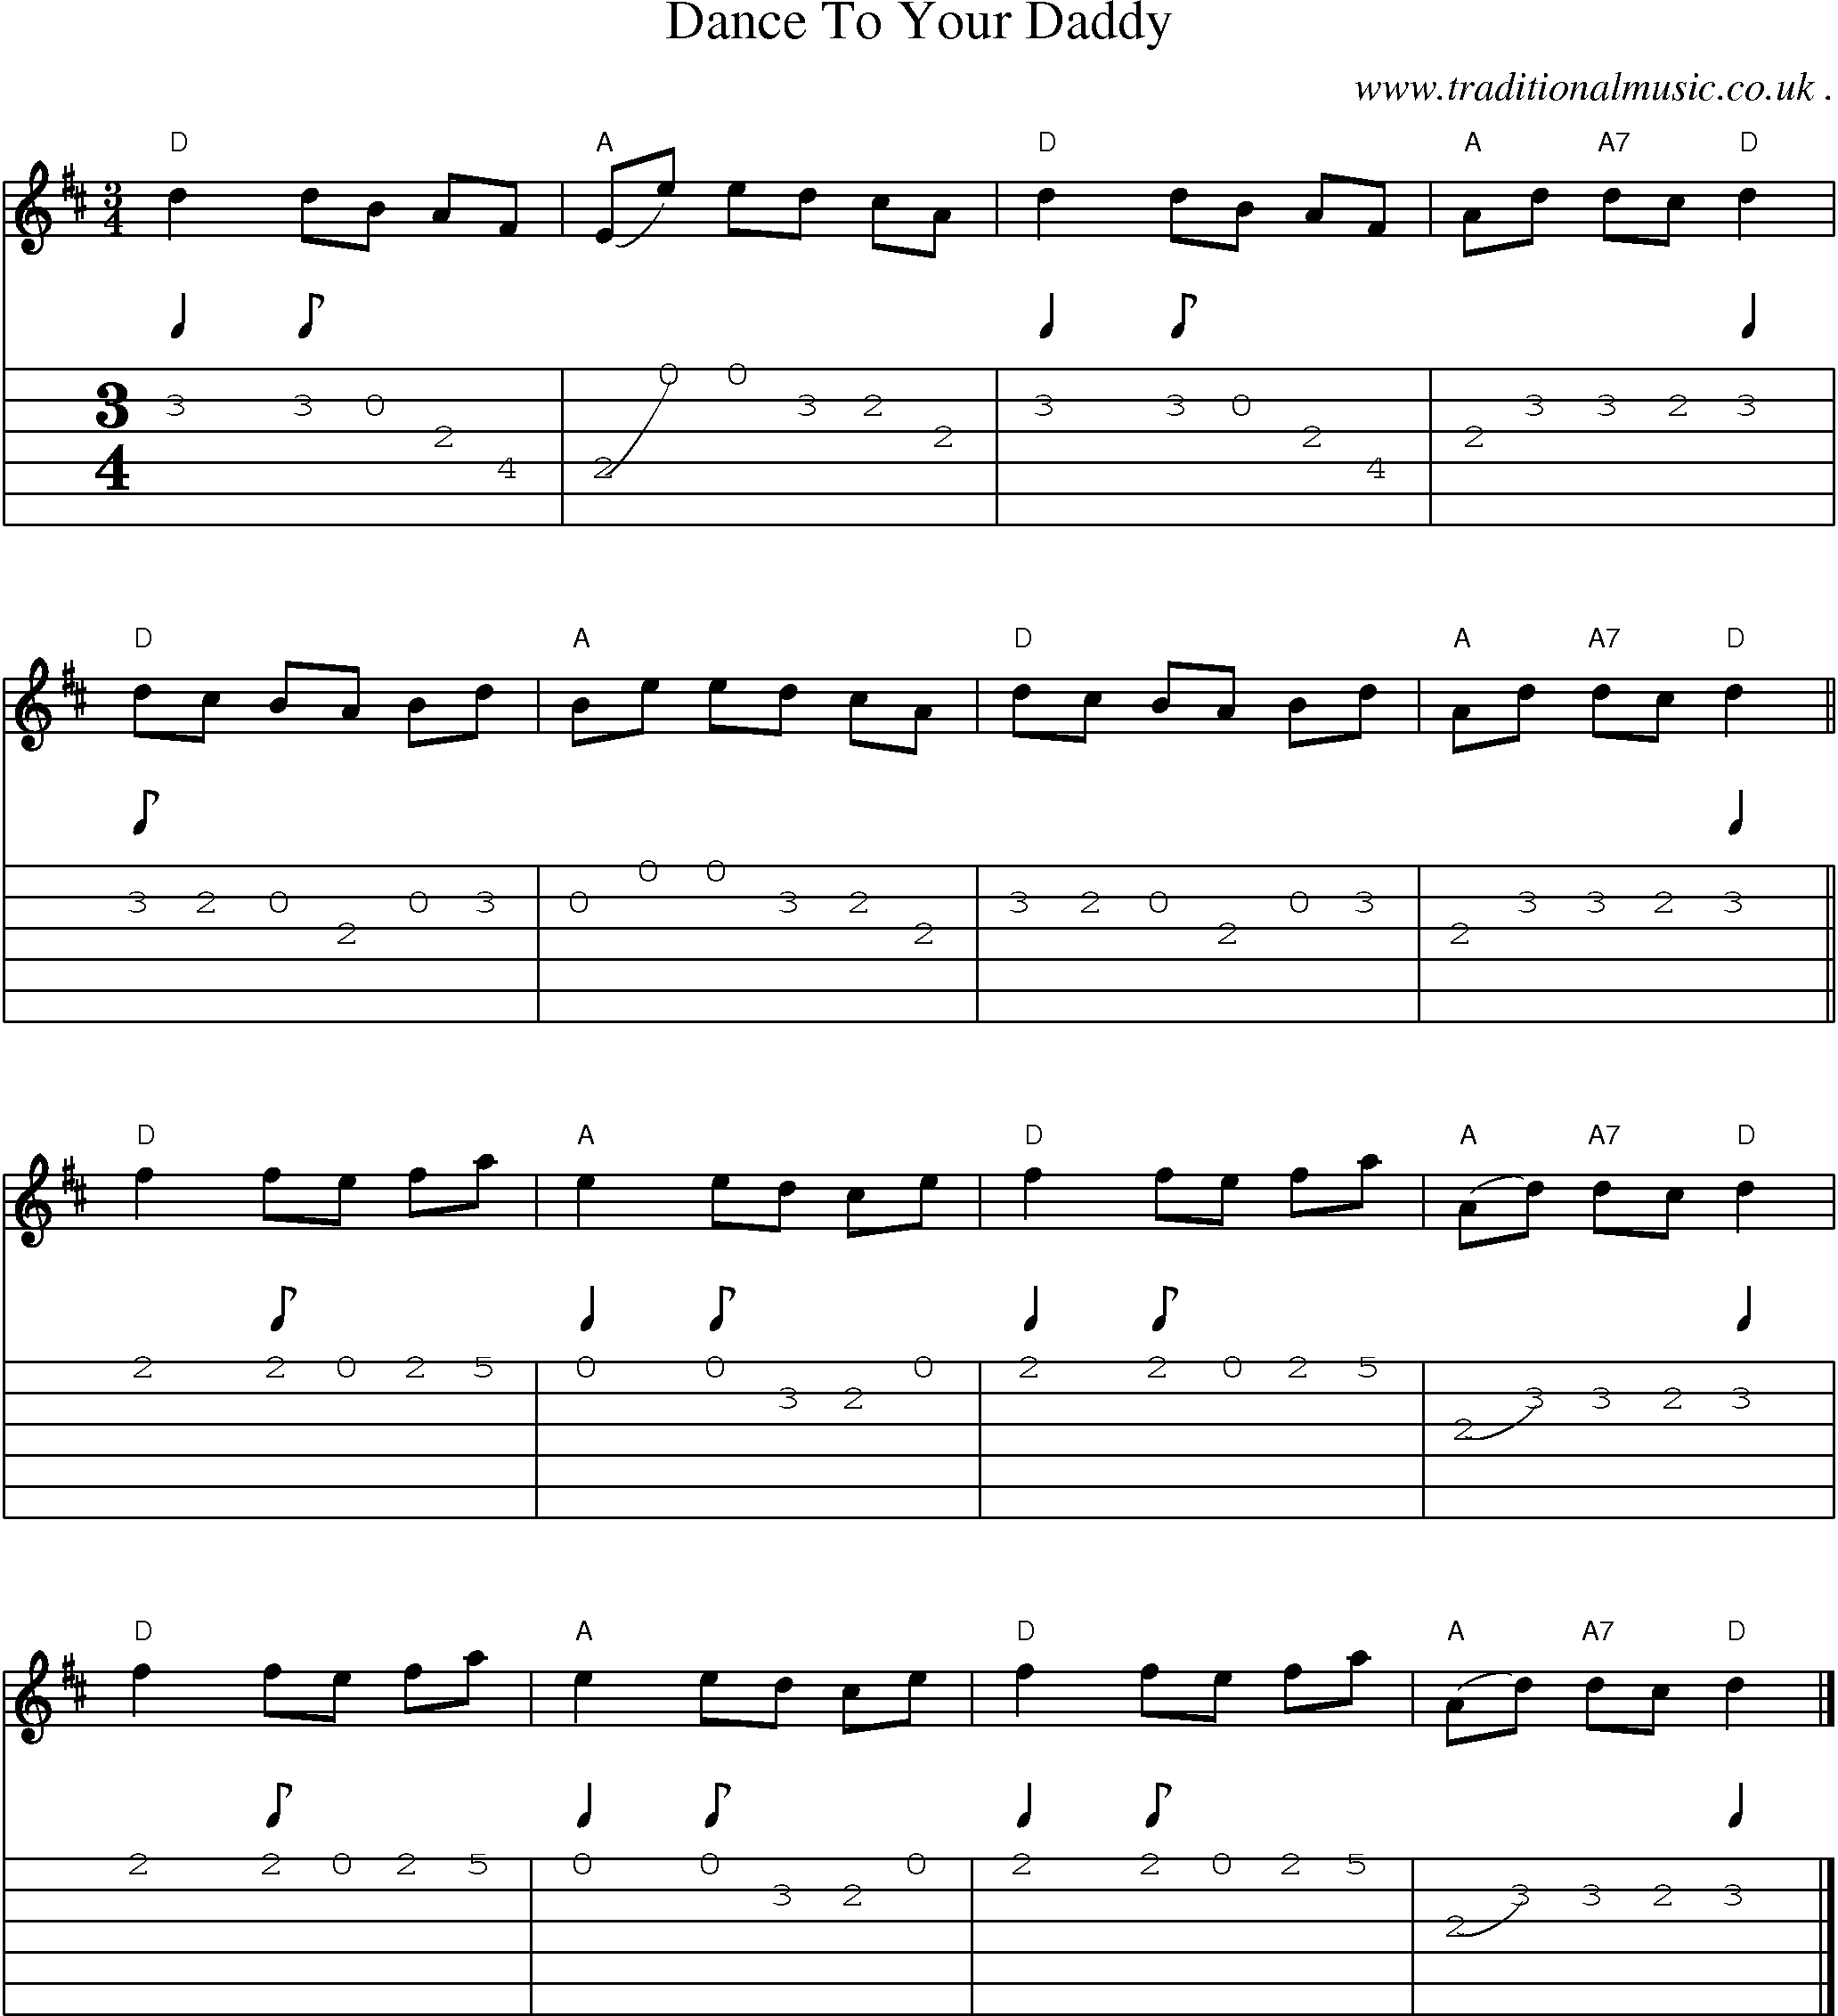 Music Score and Guitar Tabs for Dance To Your Daddy